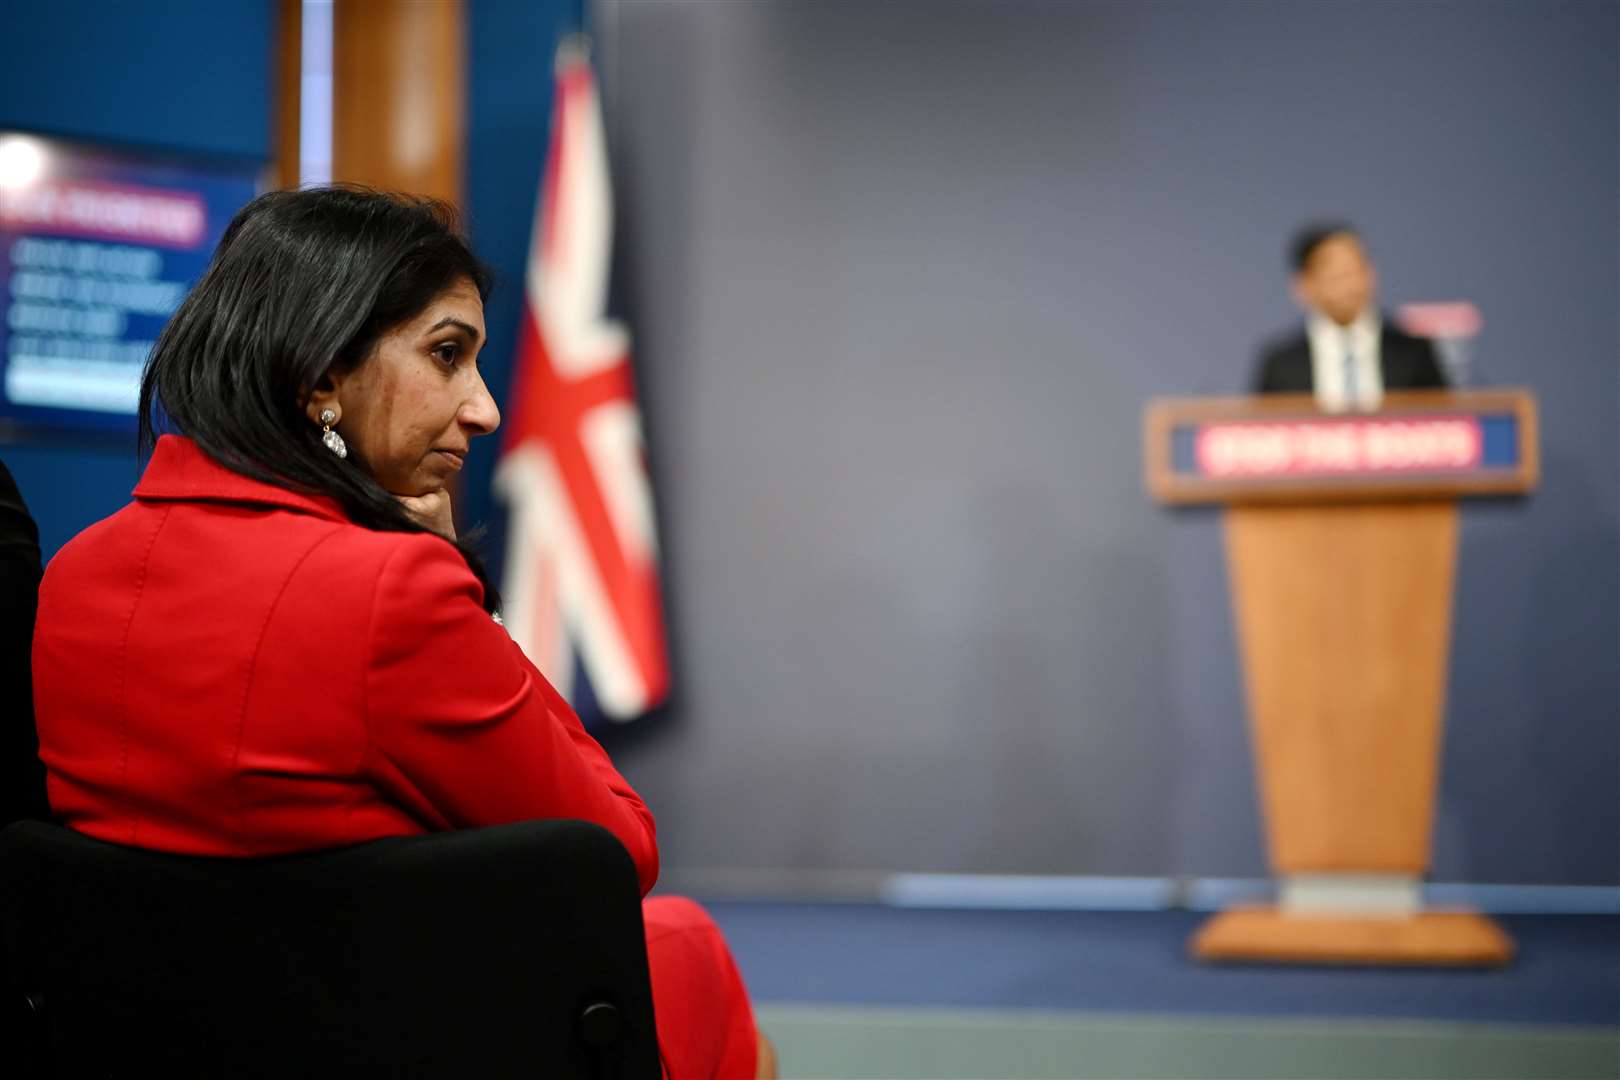 Home Secretary Suella Braverman is doing a bad job according to 38% of those asked, up slightly from 37% last month (Leon Neal/PA)